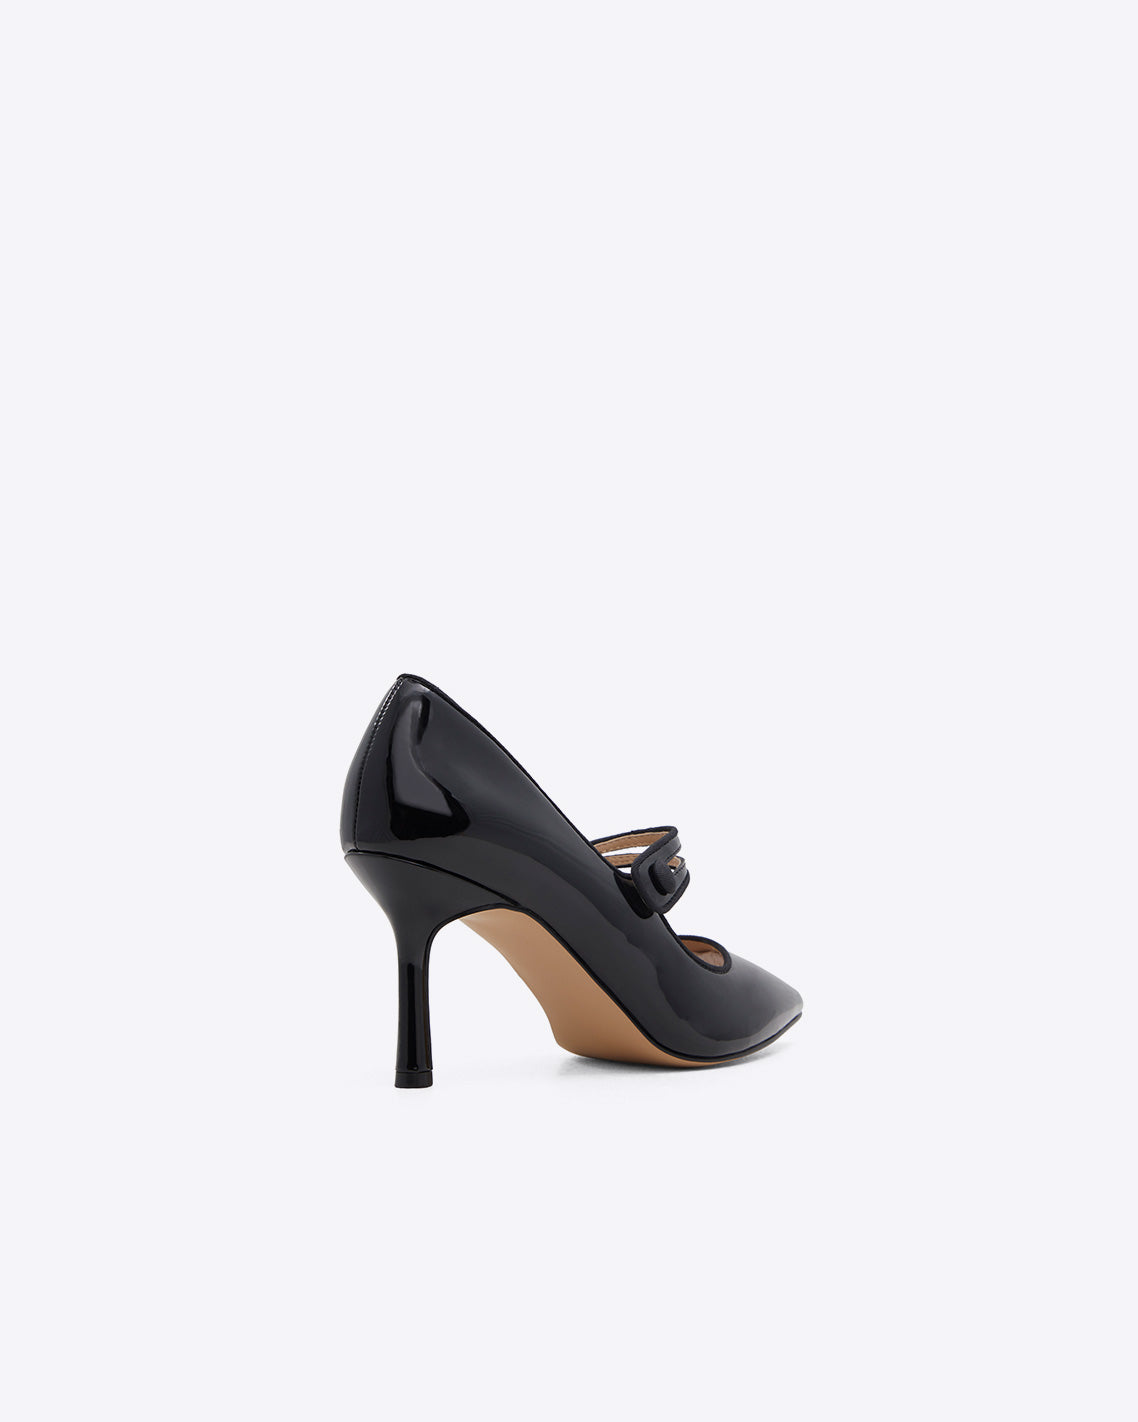 Mary Jane in Black Patent Leather